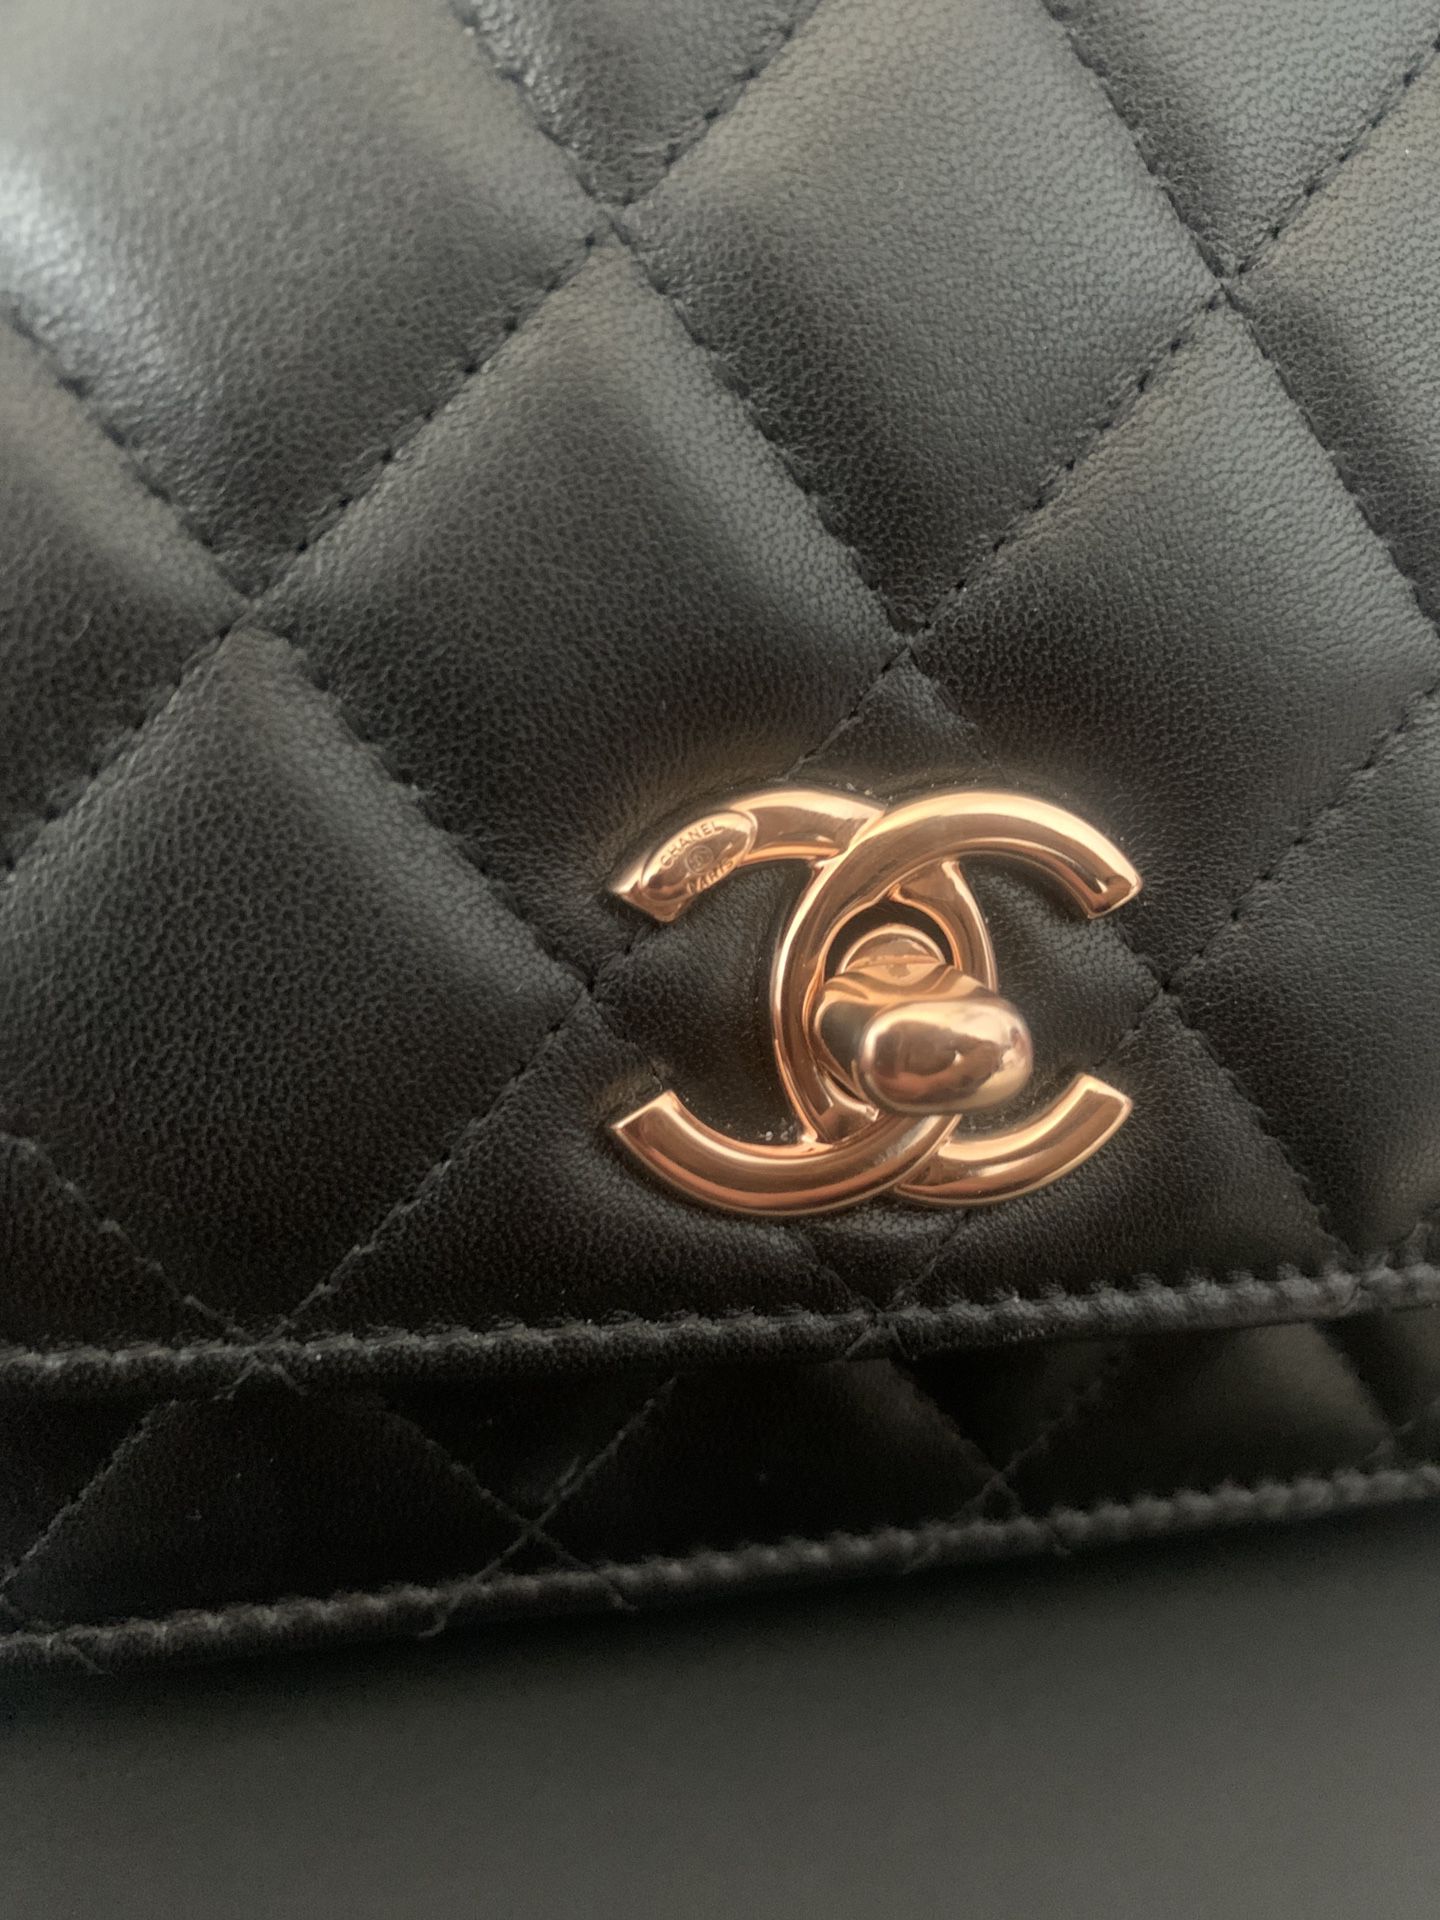 Designer CH Brand Leather WOC (Wallet On Chain) - Black for Sale in San  Jose, CA - OfferUp